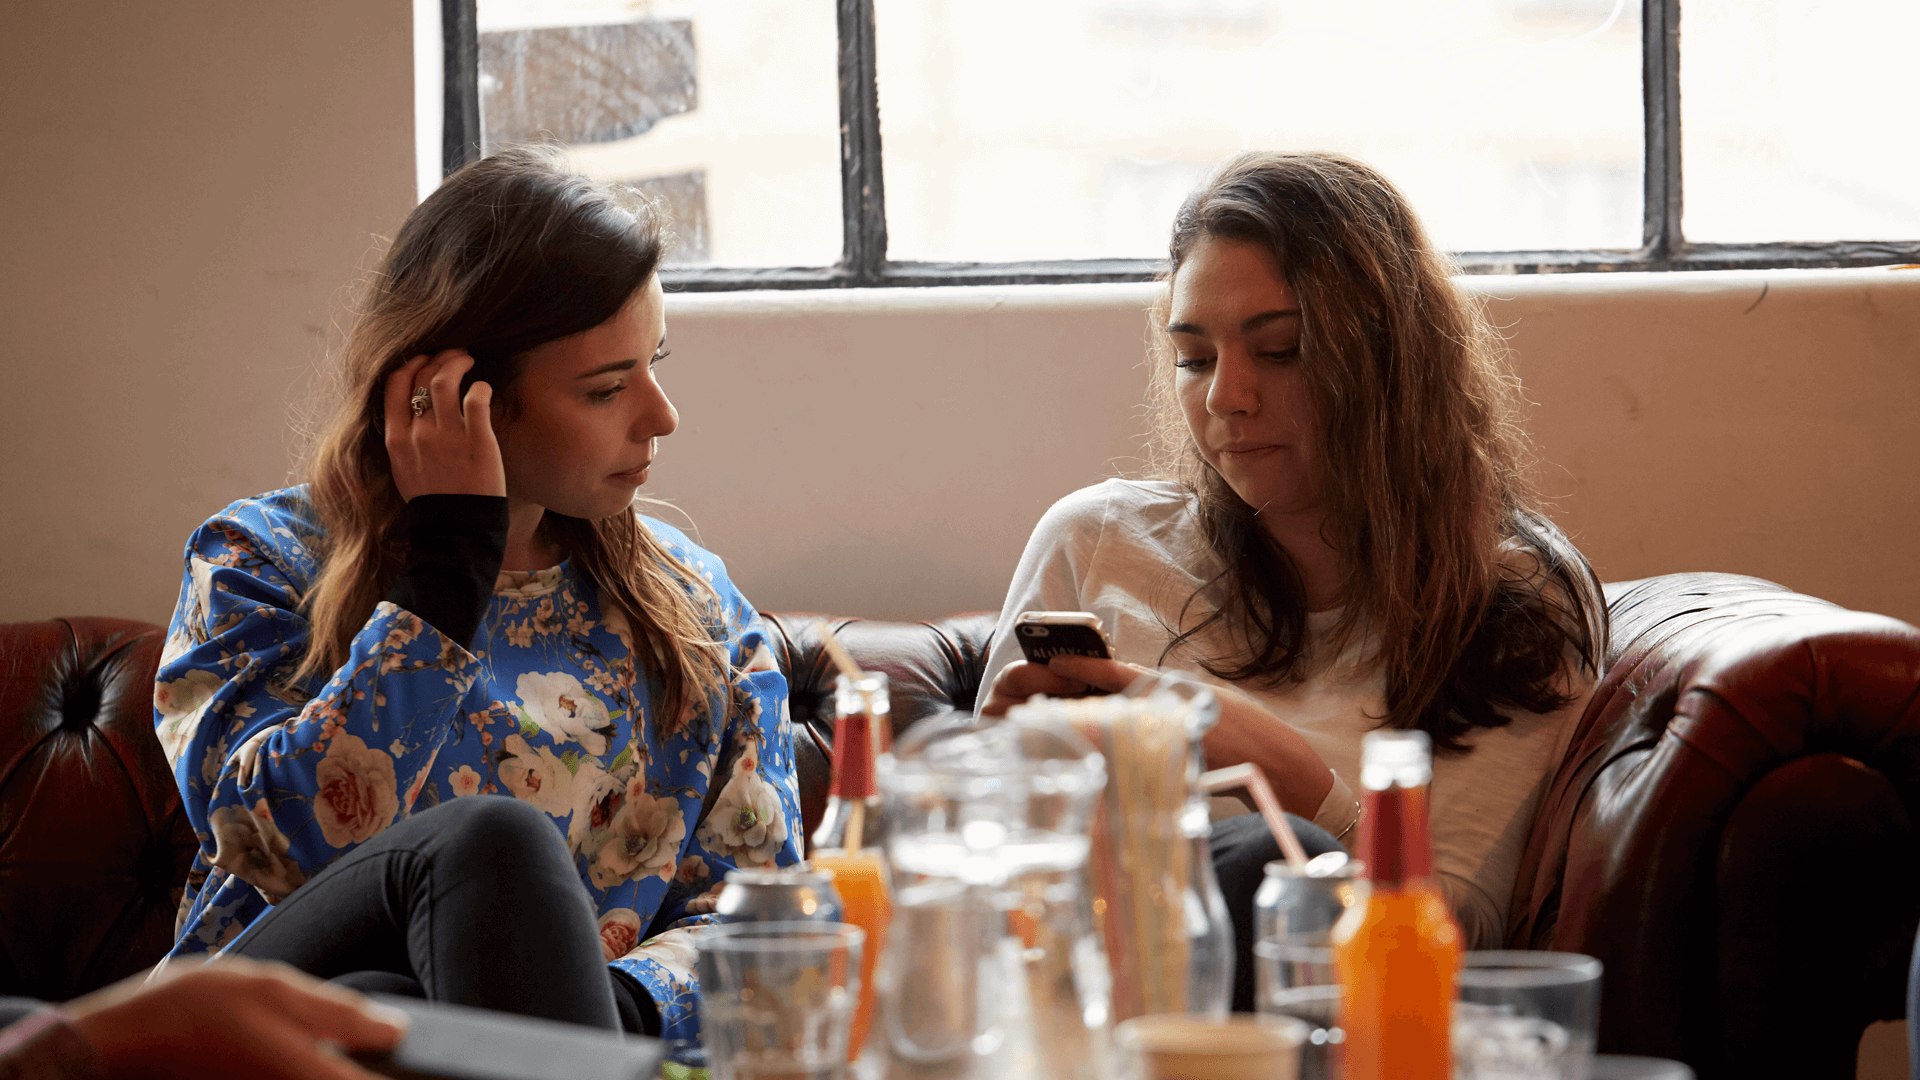 medium shot of two girls sitting on a couch one is using a phone while another girl is glancing on her phone bottles and drinks are on the table as foreground